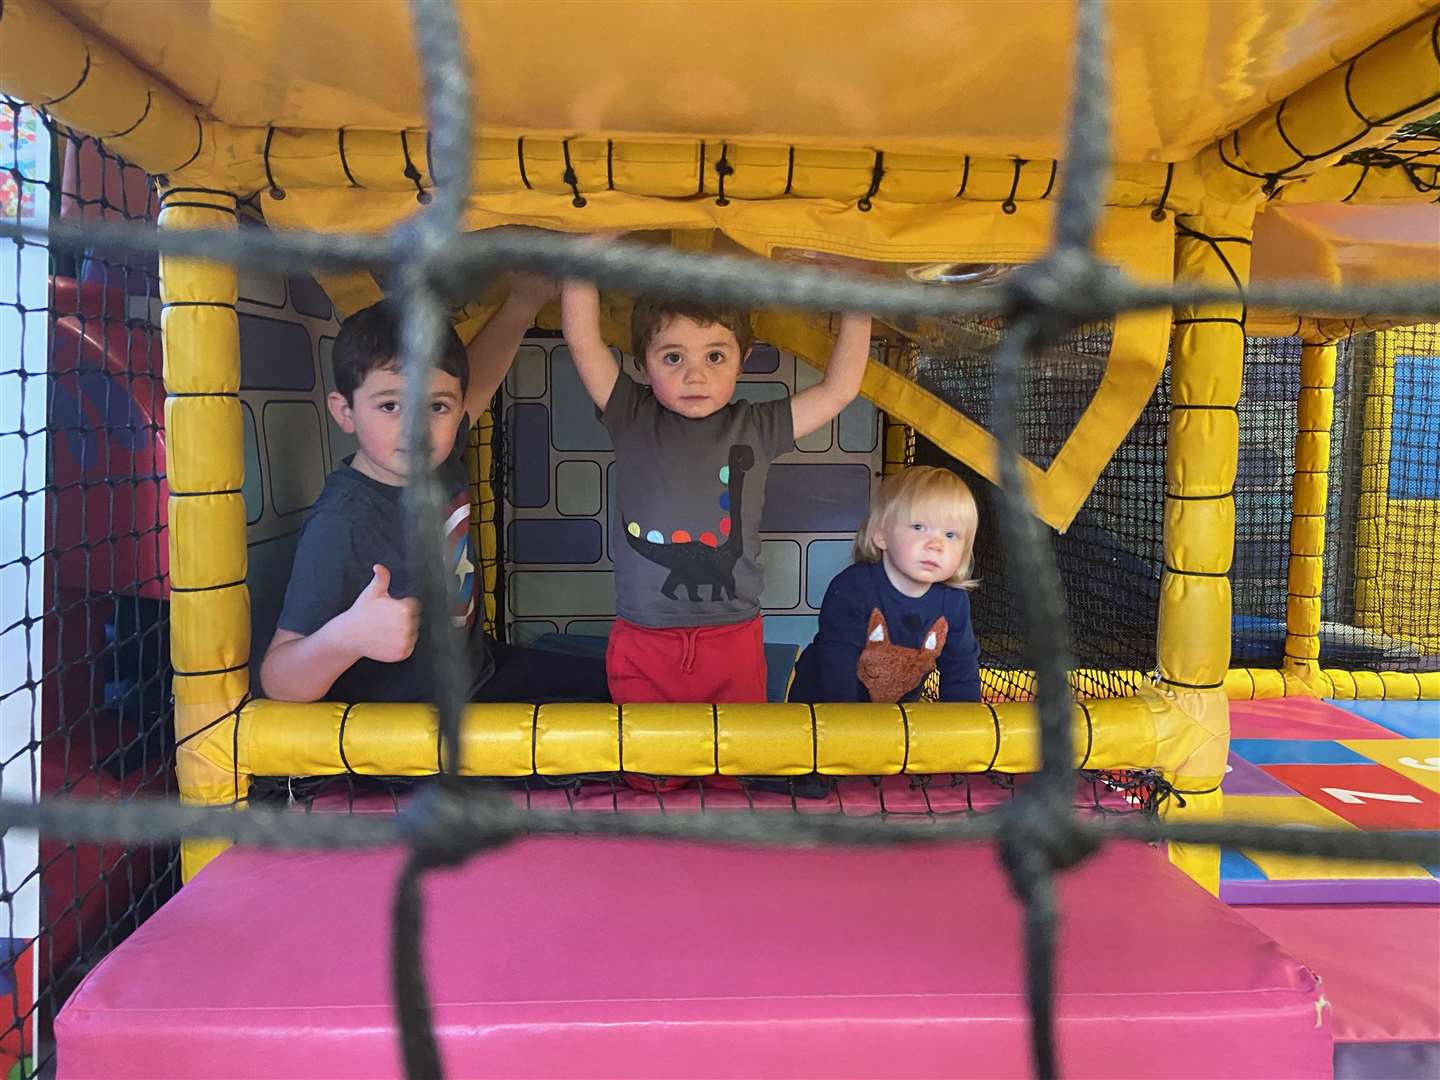 These children were among those who had lots of fun in the soft-play area when Messy Nessy reopened on Friday.